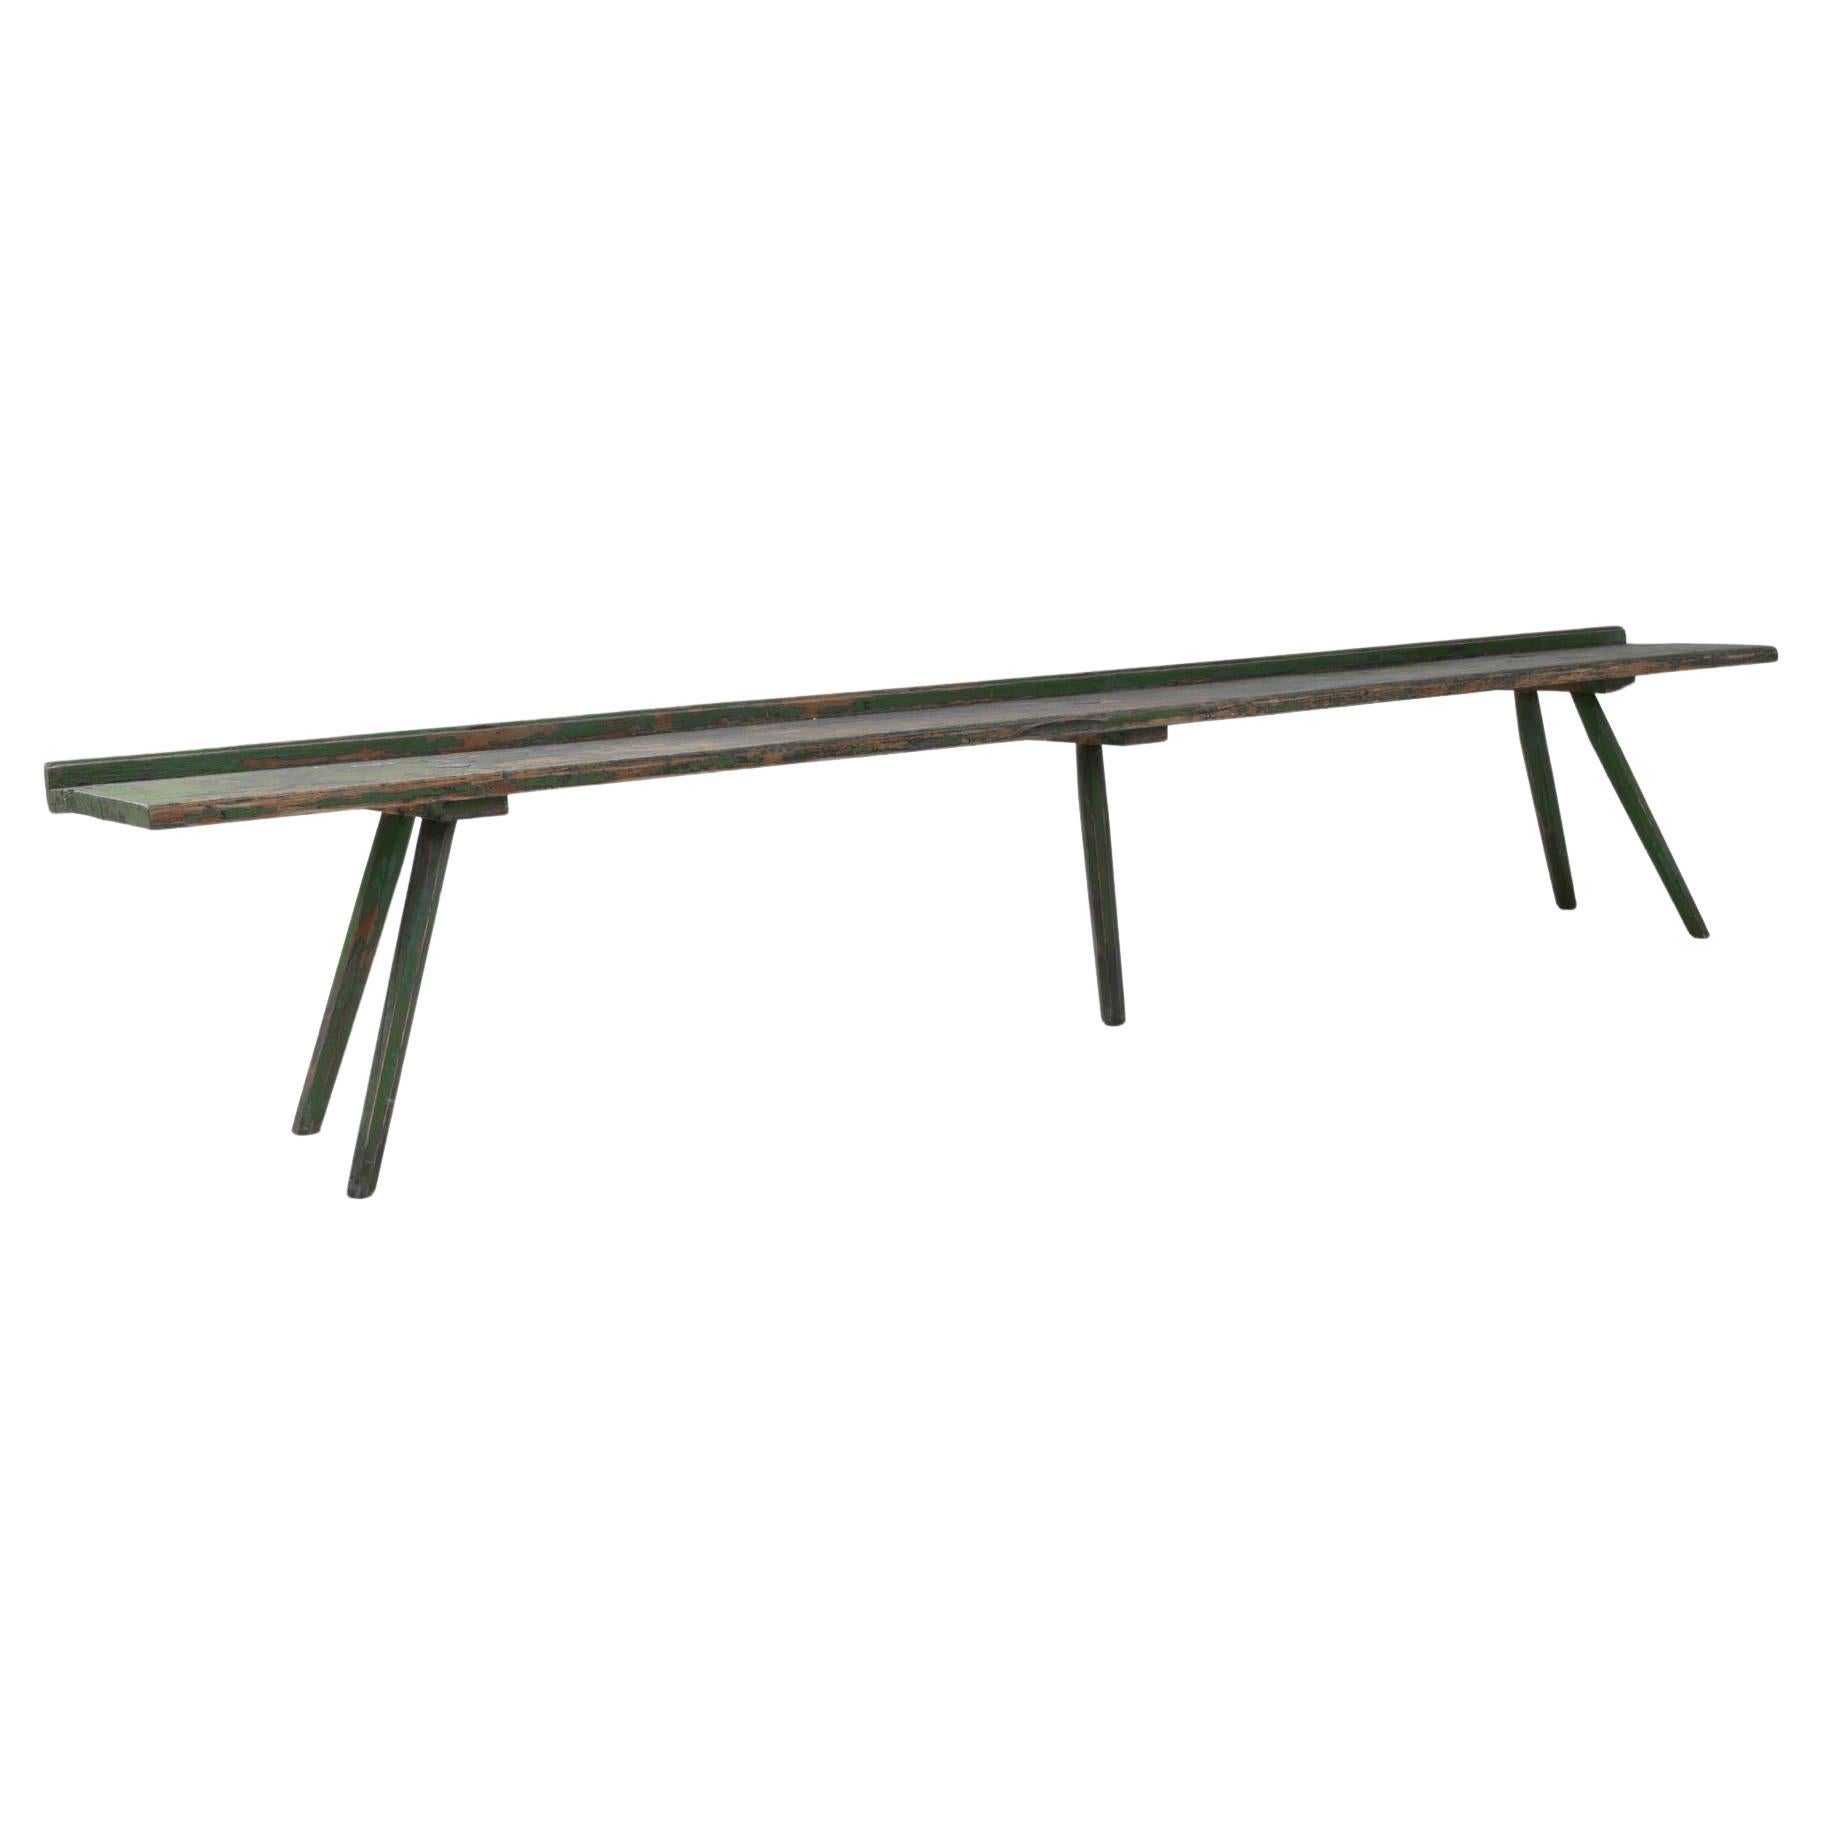 19th Century Central European Wood Patinated Bench